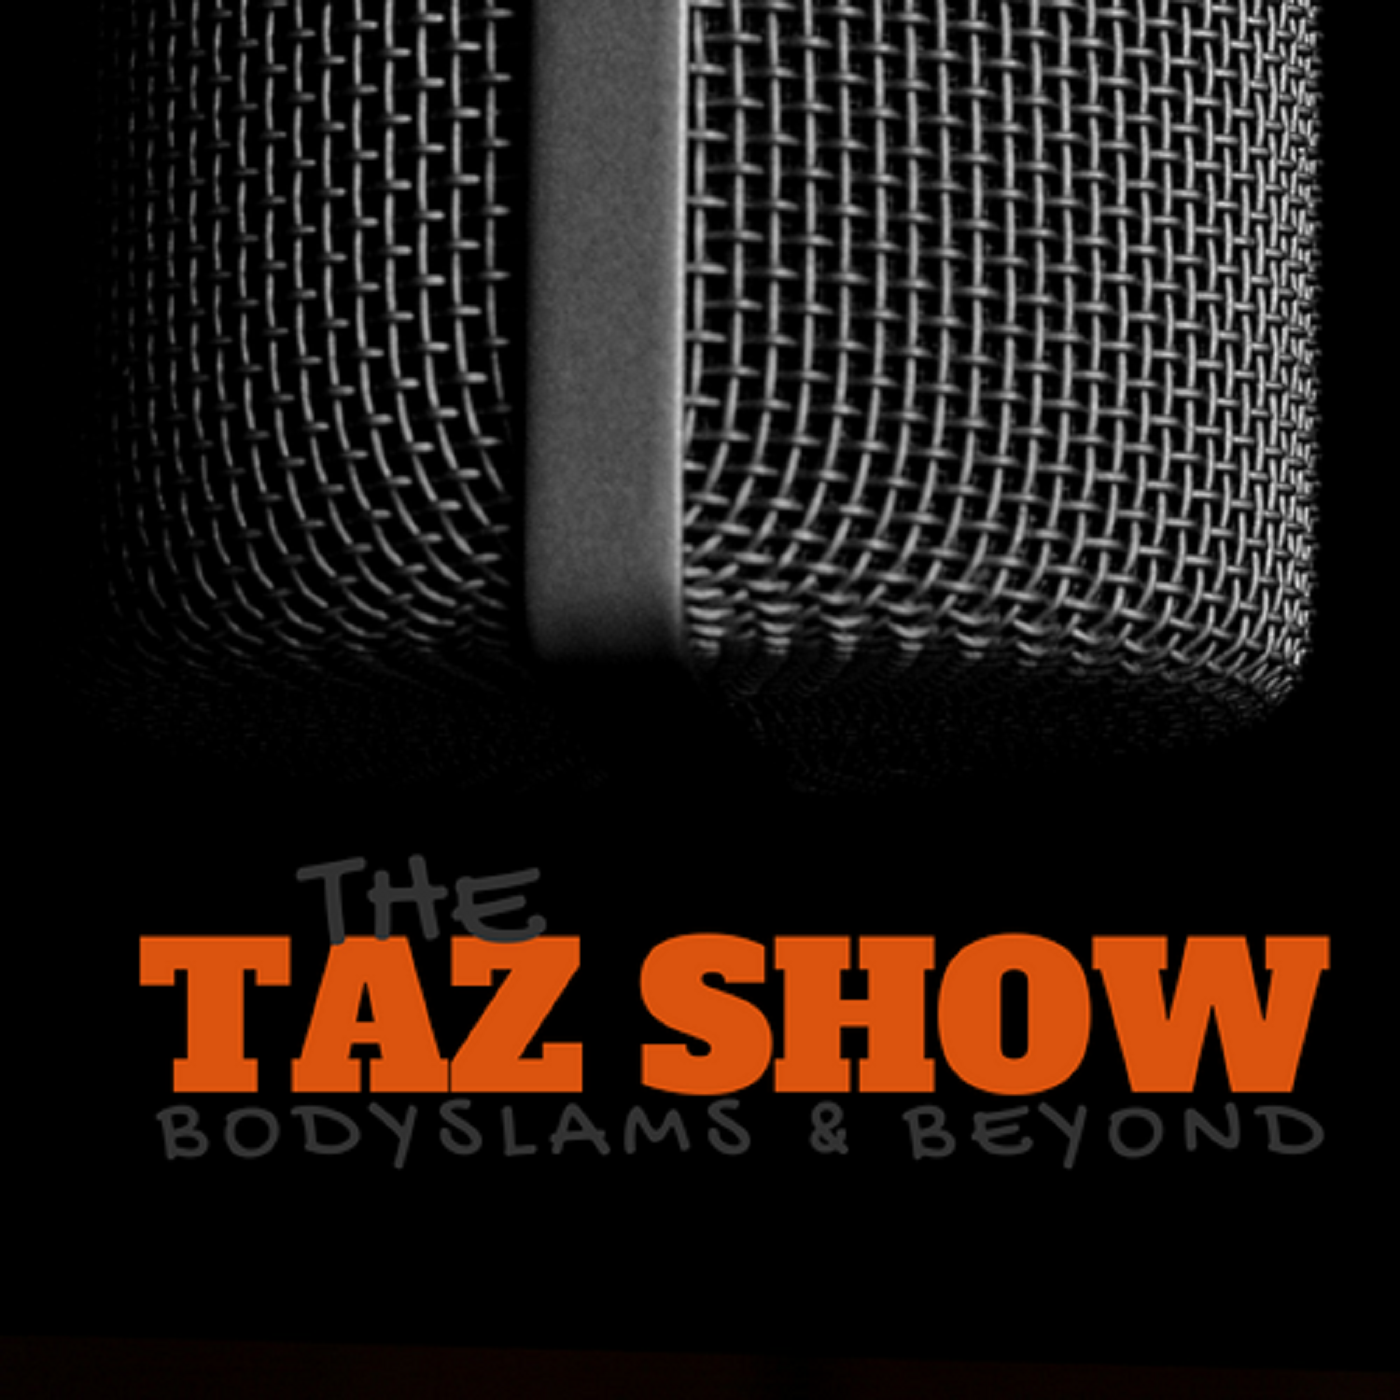 The Taz Show! Tuesday, October 13th, 2015